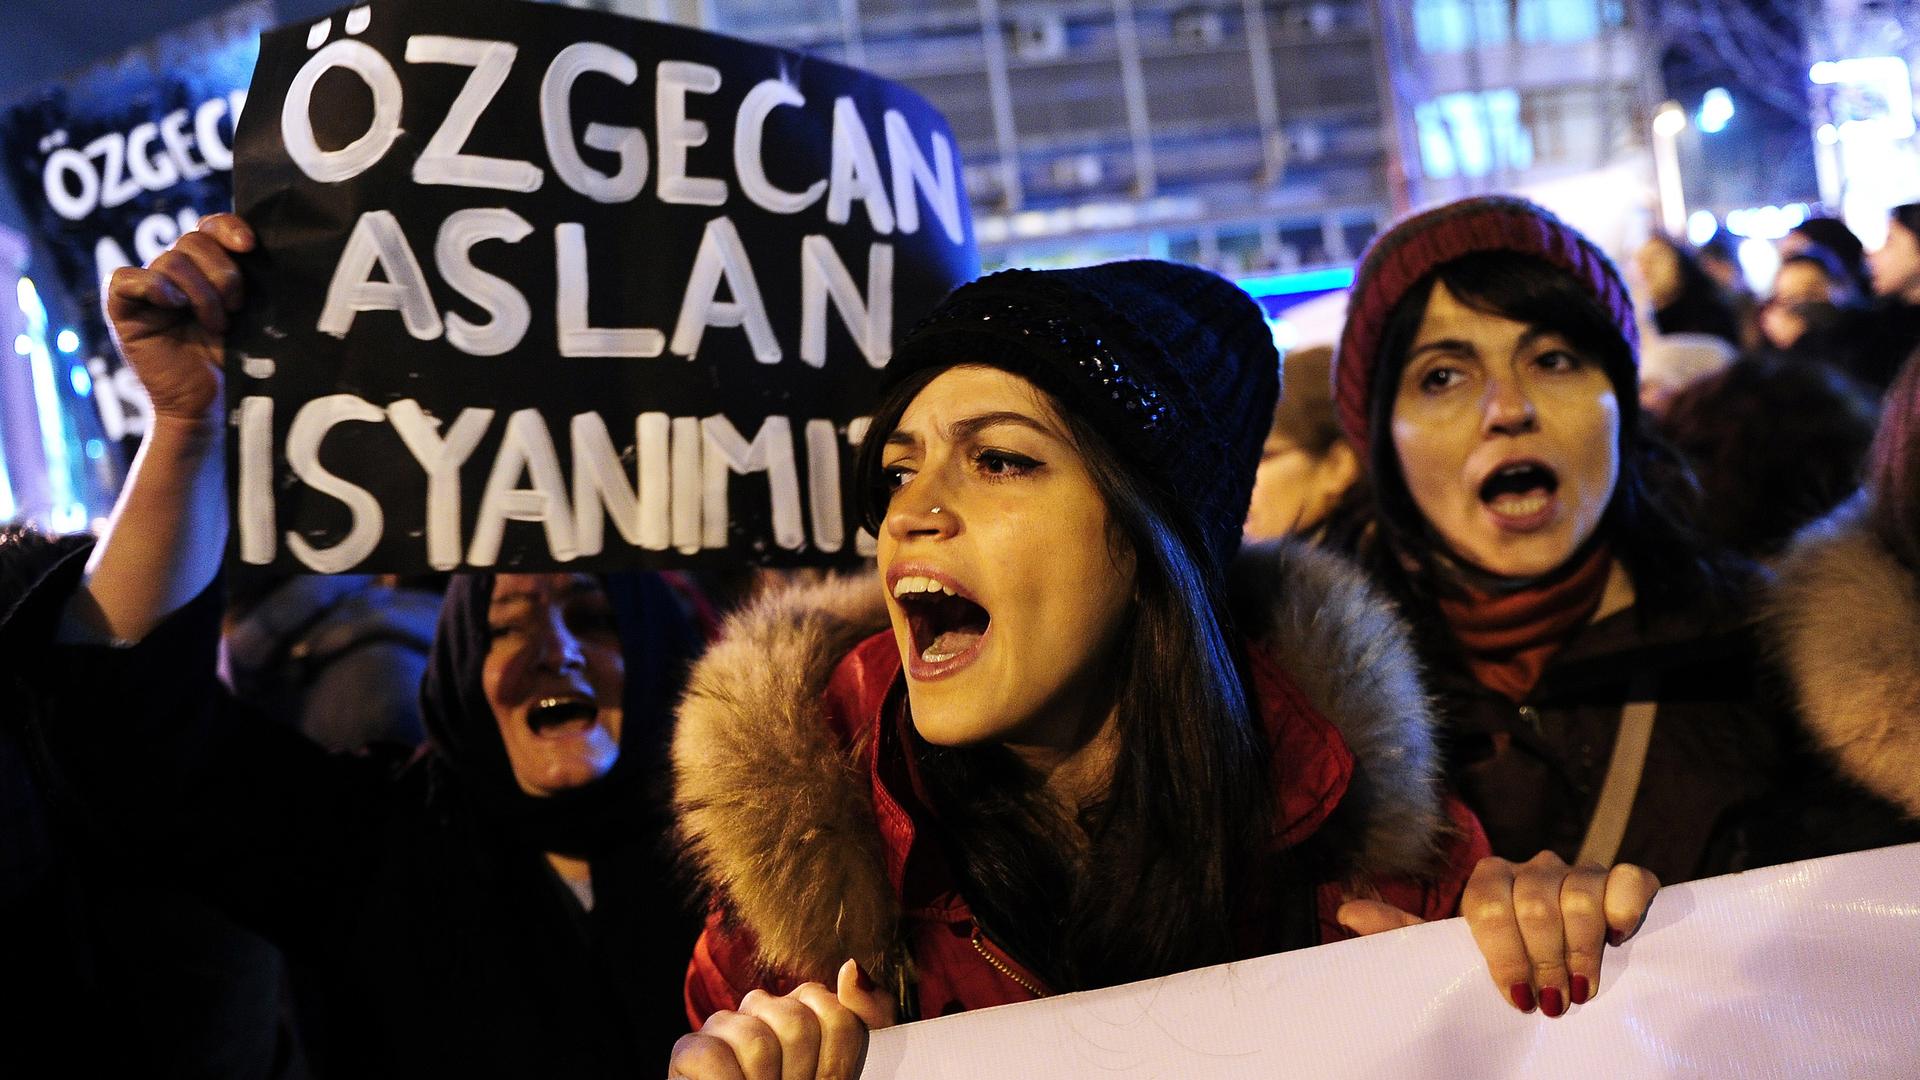 A woman shouts slogans during a demostration in Istanbul against the murder of a young woman named Özgecan Aslan.